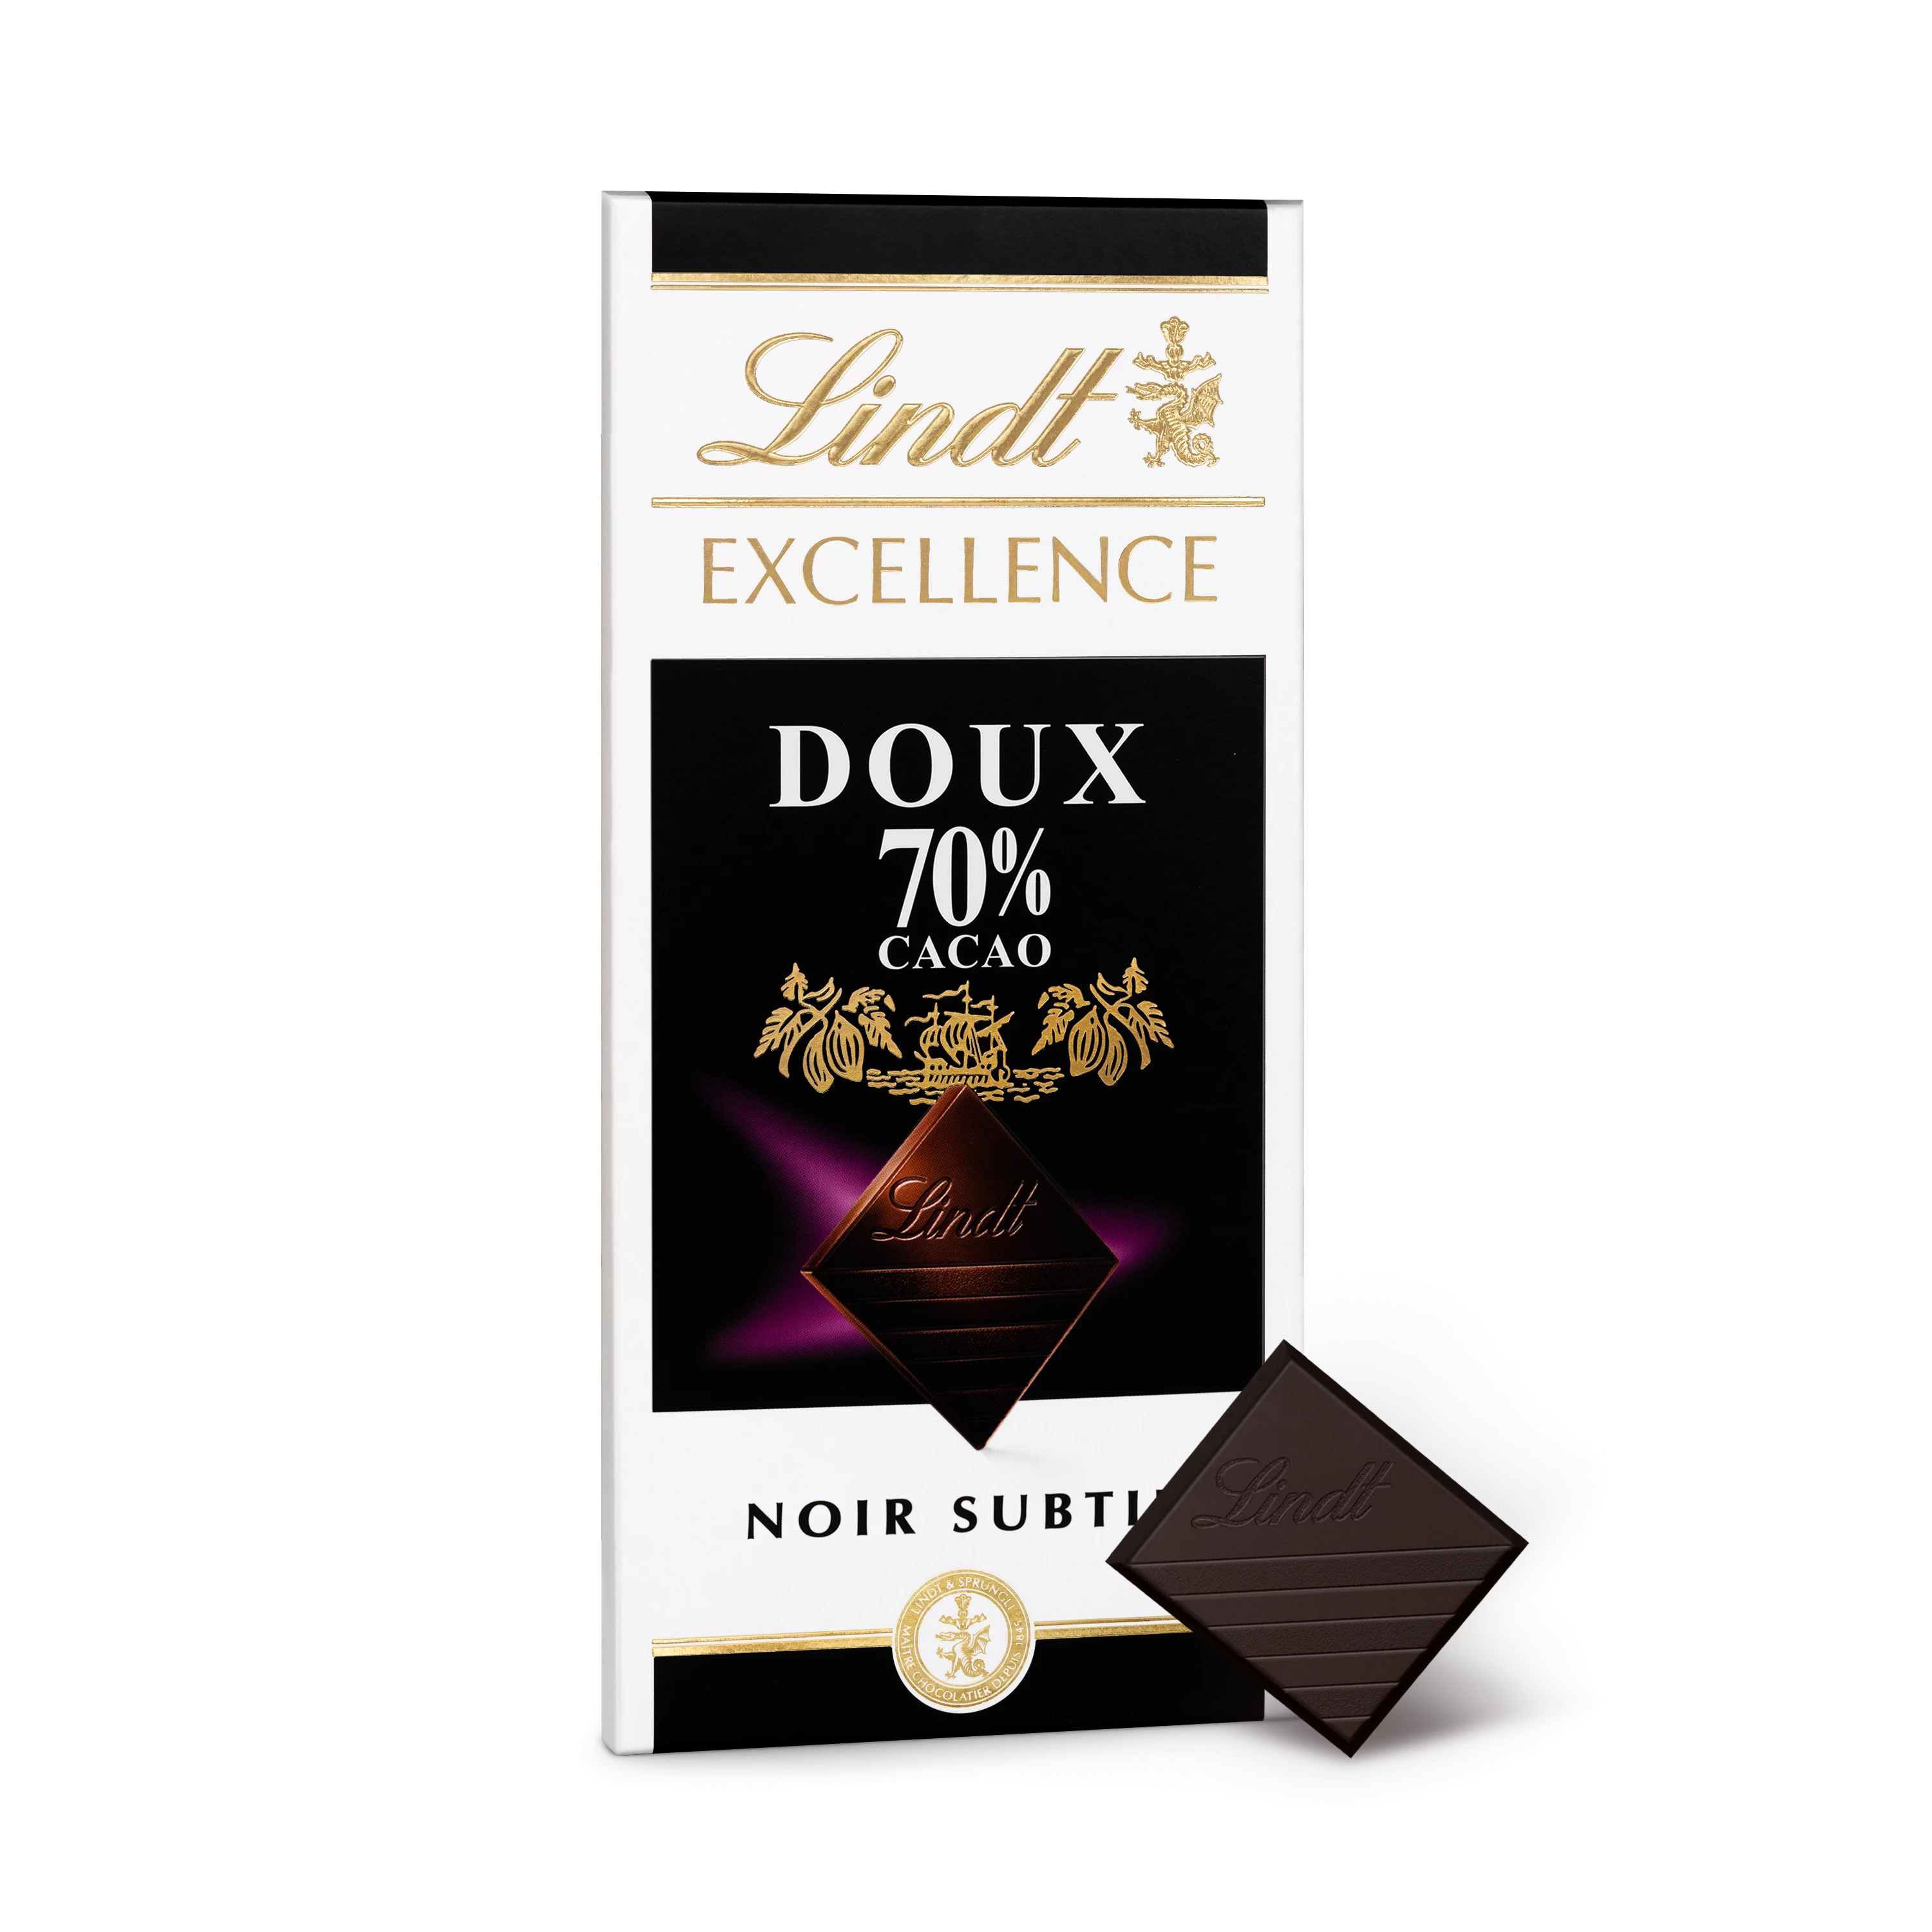 Excellence Fondente 70% Cacao Dolce Tavoletta 100 G - LINDT